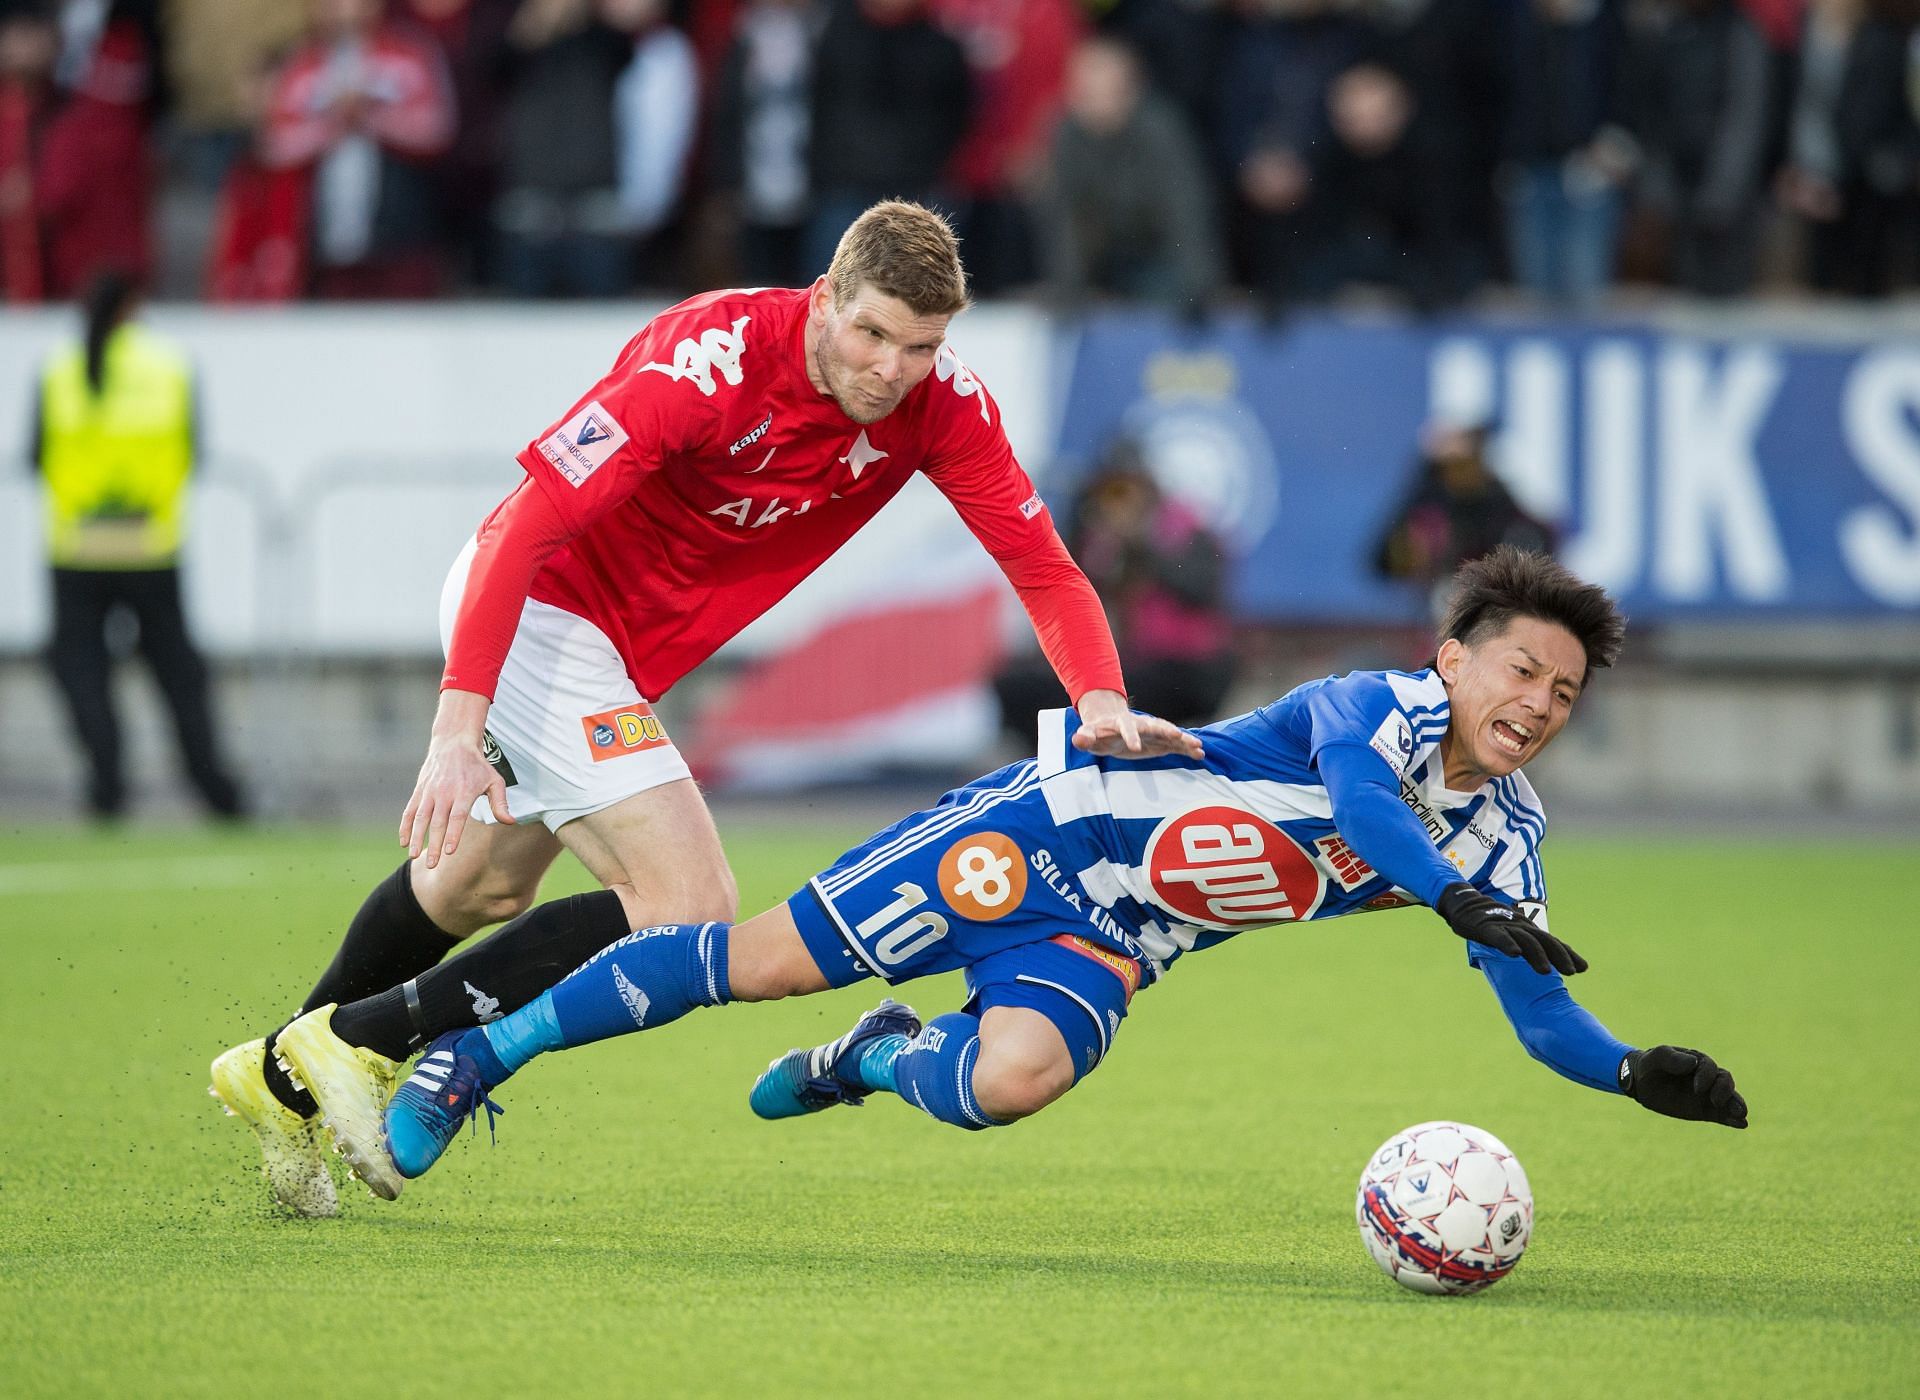 HJK Helsinki will look to edge Silkeborg to secure a group stage spot in the UEFA Europa League.